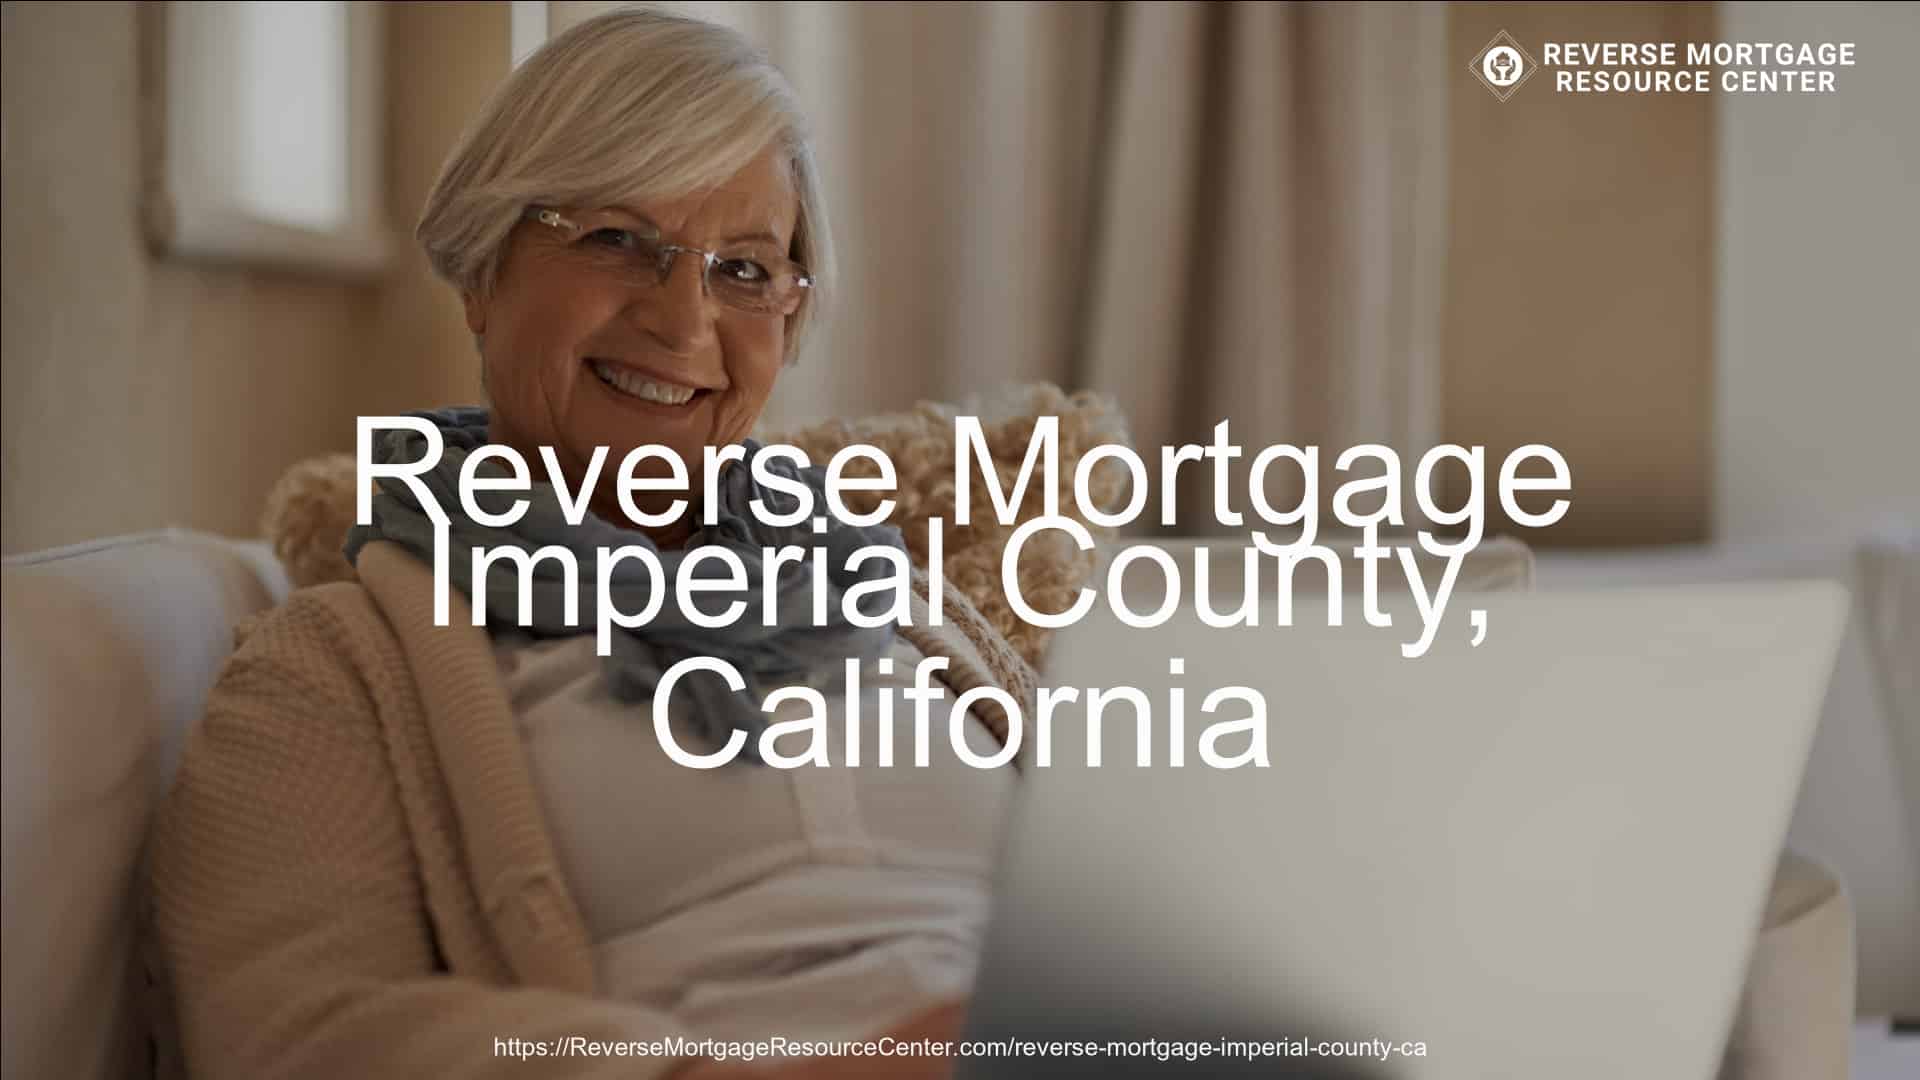 Reverse Mortgage in Imperial County, CA